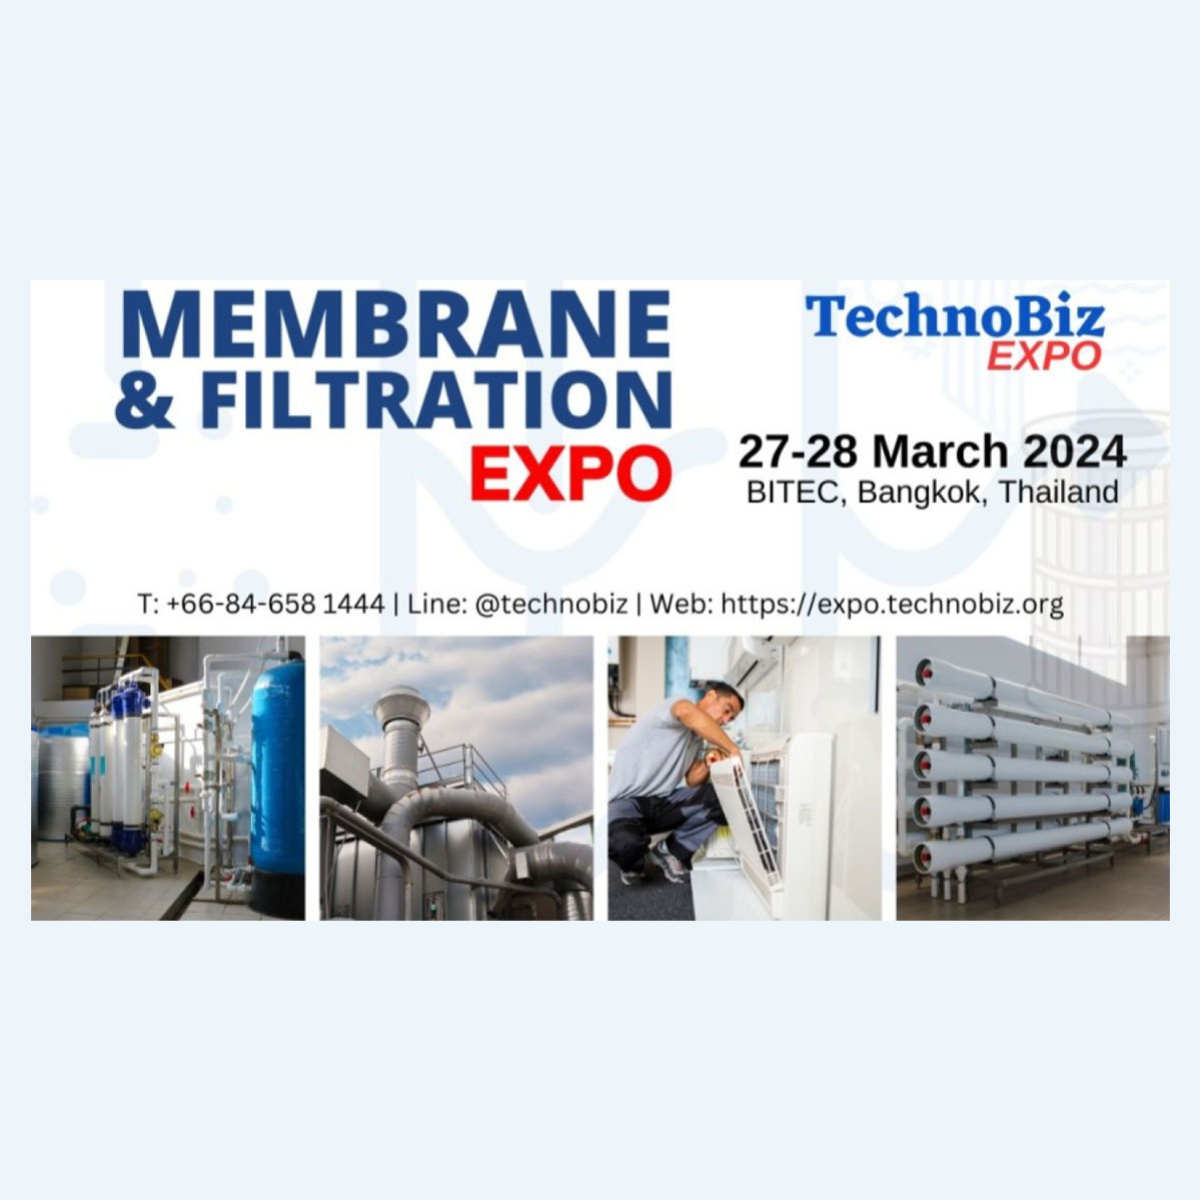 Exhibitor at Membrane&Filtration Expo in Bangkok 27-28 March 2024